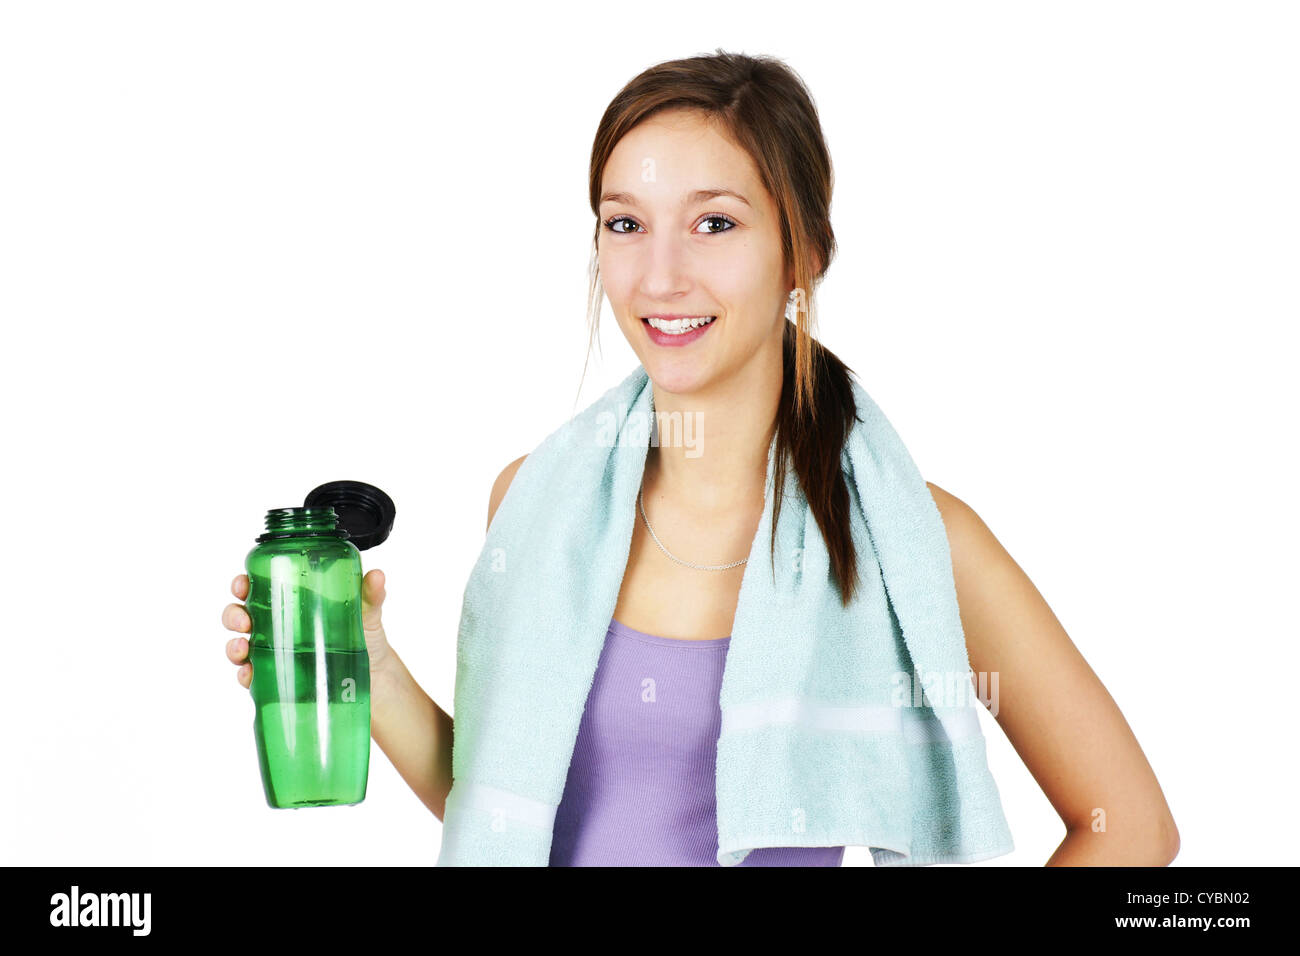 Cute, healthy and sporty young woman with towell on shoulders drinking water after working out, yoga or other exercise. Stock Photo